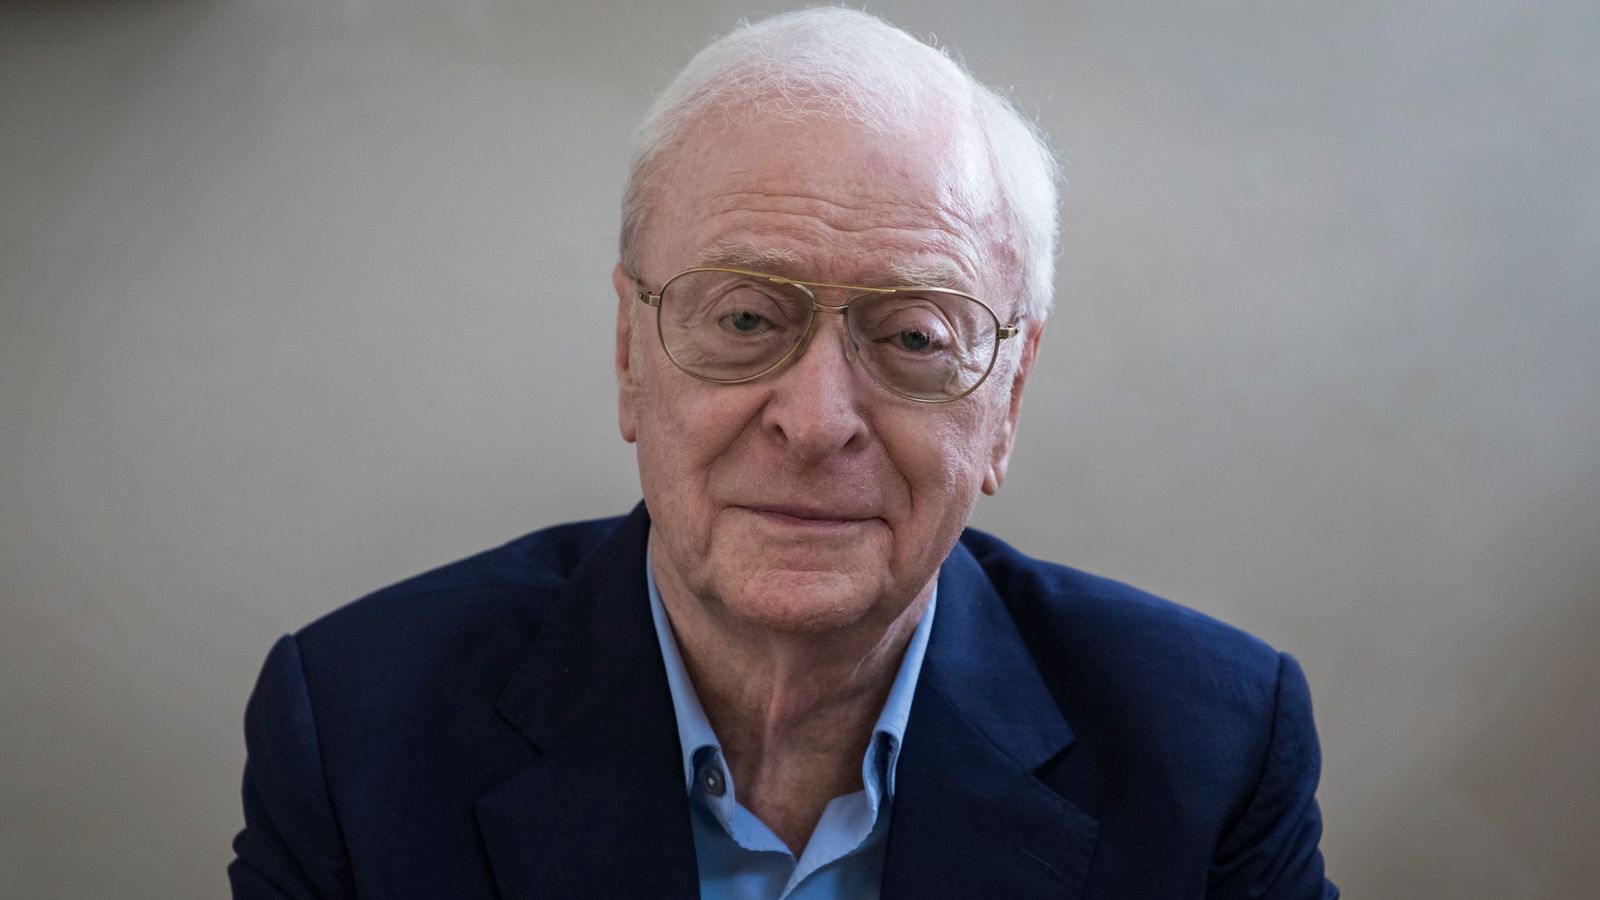 Sir Michael Caine confirms retirement from acting, saying: 'You don't have leading men at 90'